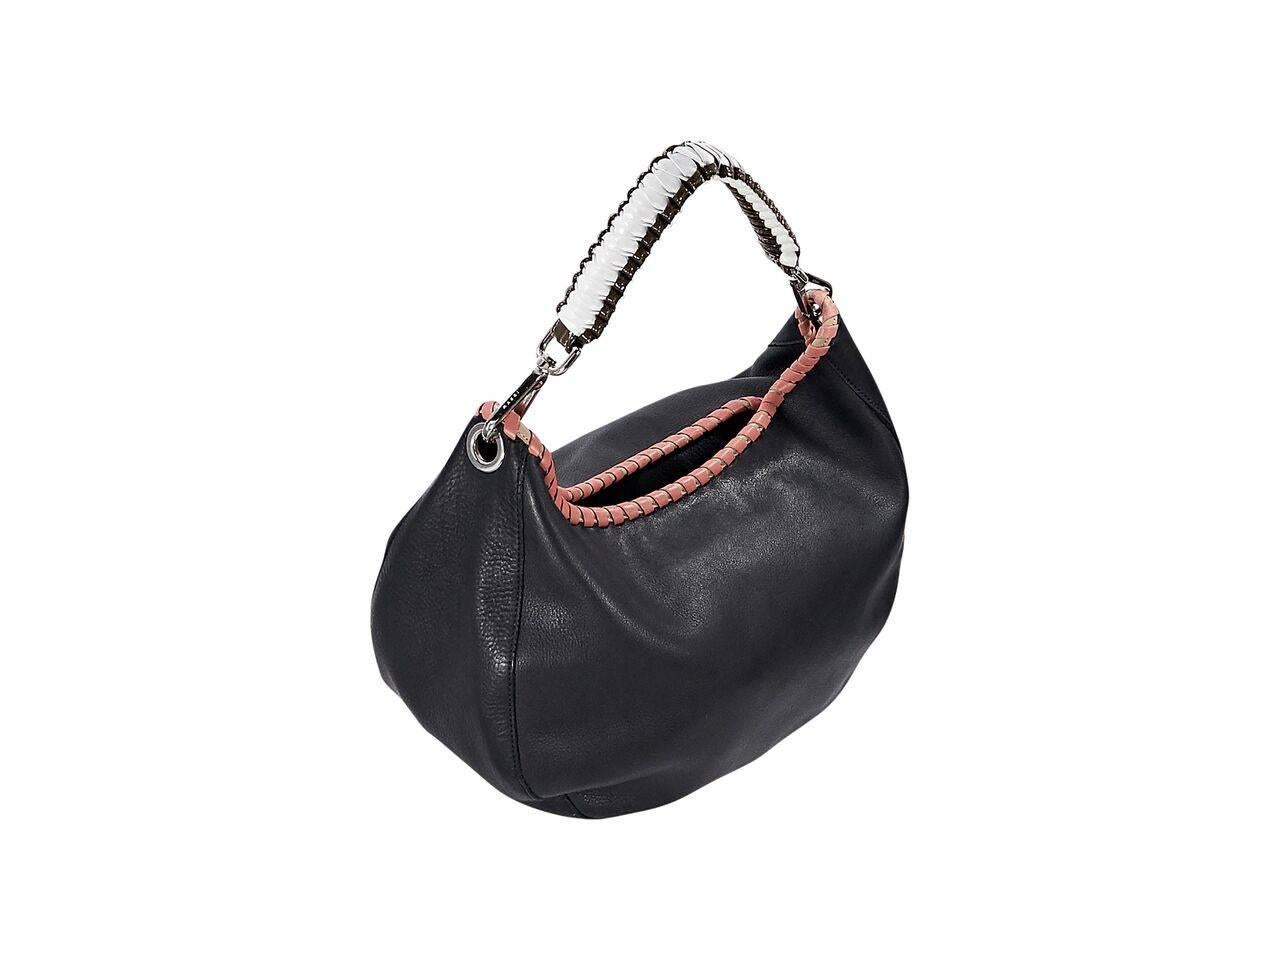 Product details:  Black leather hobo bag by Marni.  Accented with pink whipstitched trim.  Single shoulder strap.  Concealed double snap closure.  Lined interior.  Silvertone hardware.  13